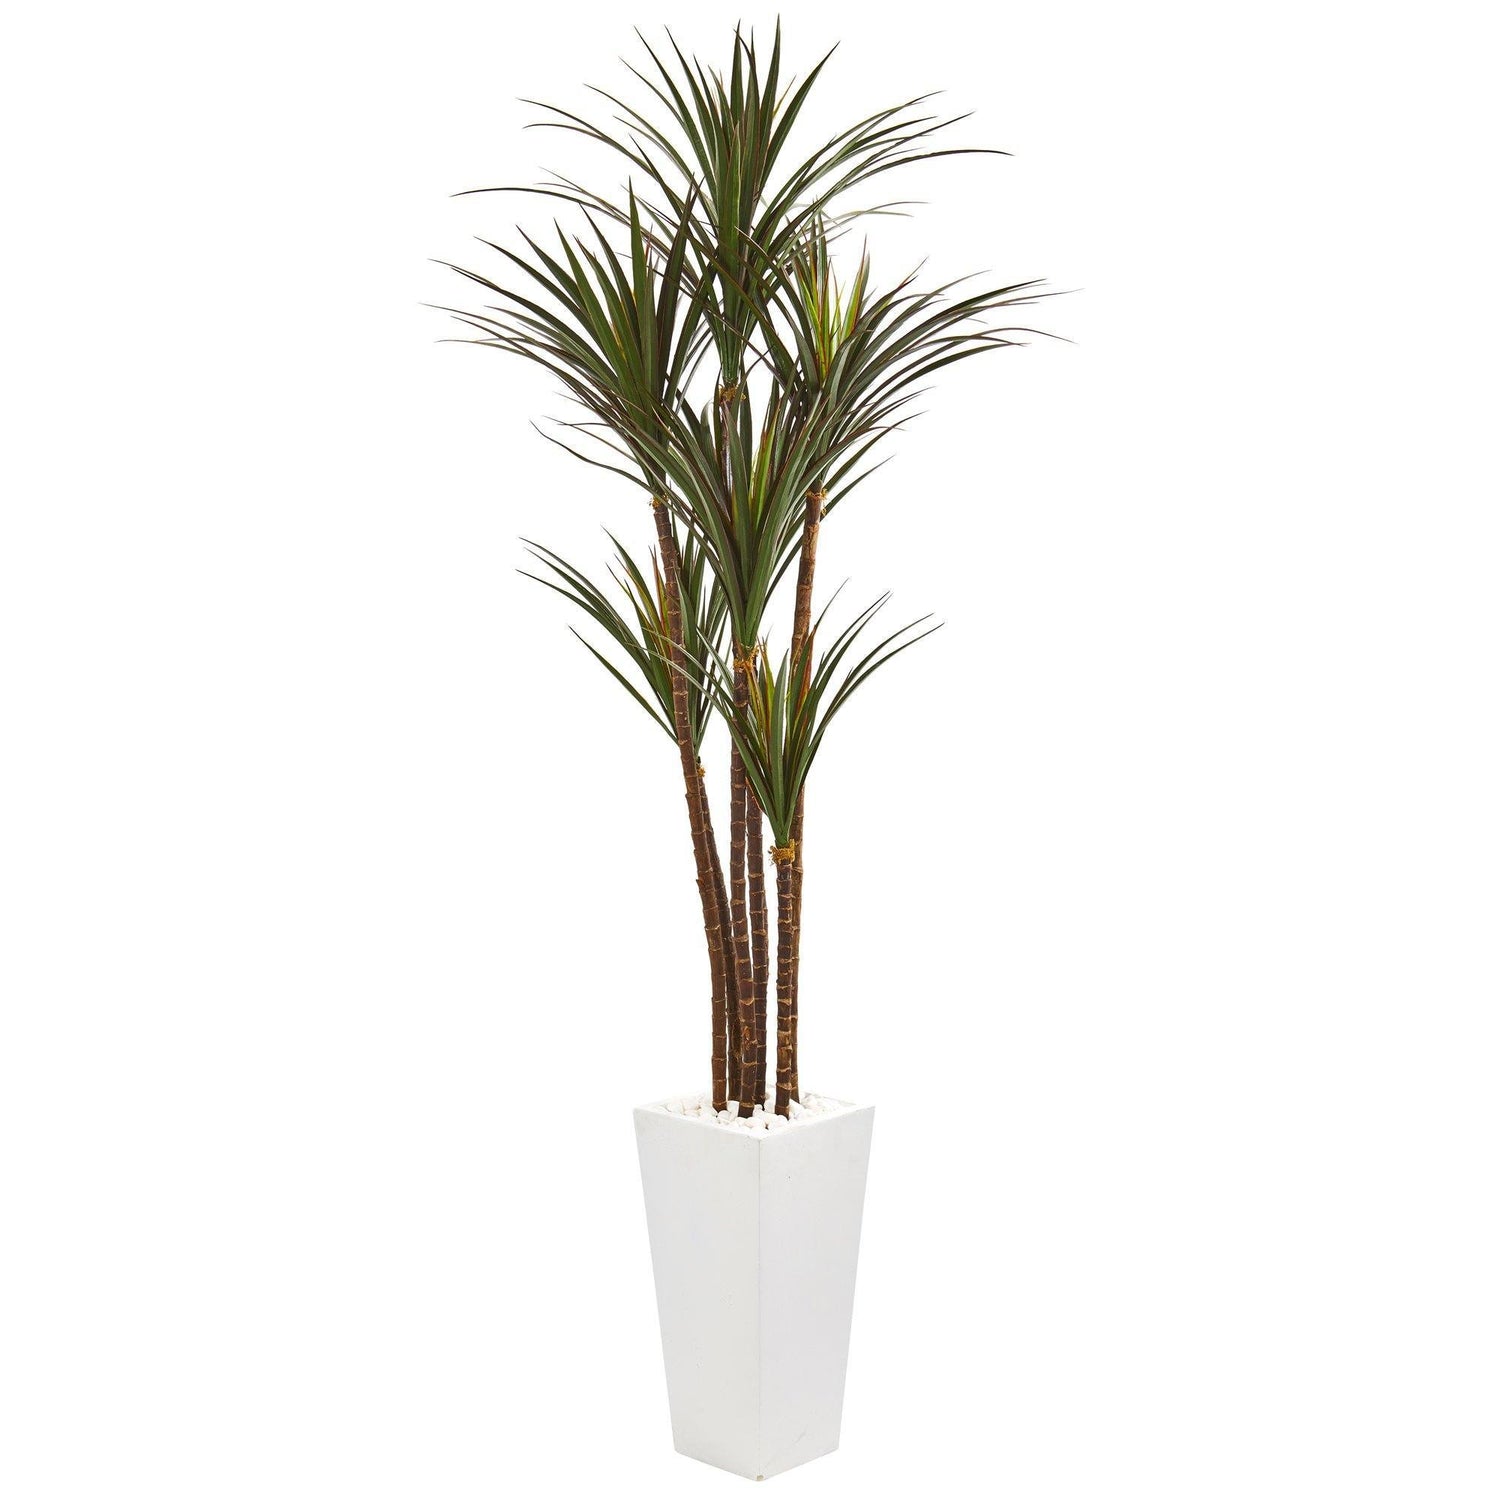 6.5’ Giant Yucca Artificial Tree in White Planter Indoor/Outdoor